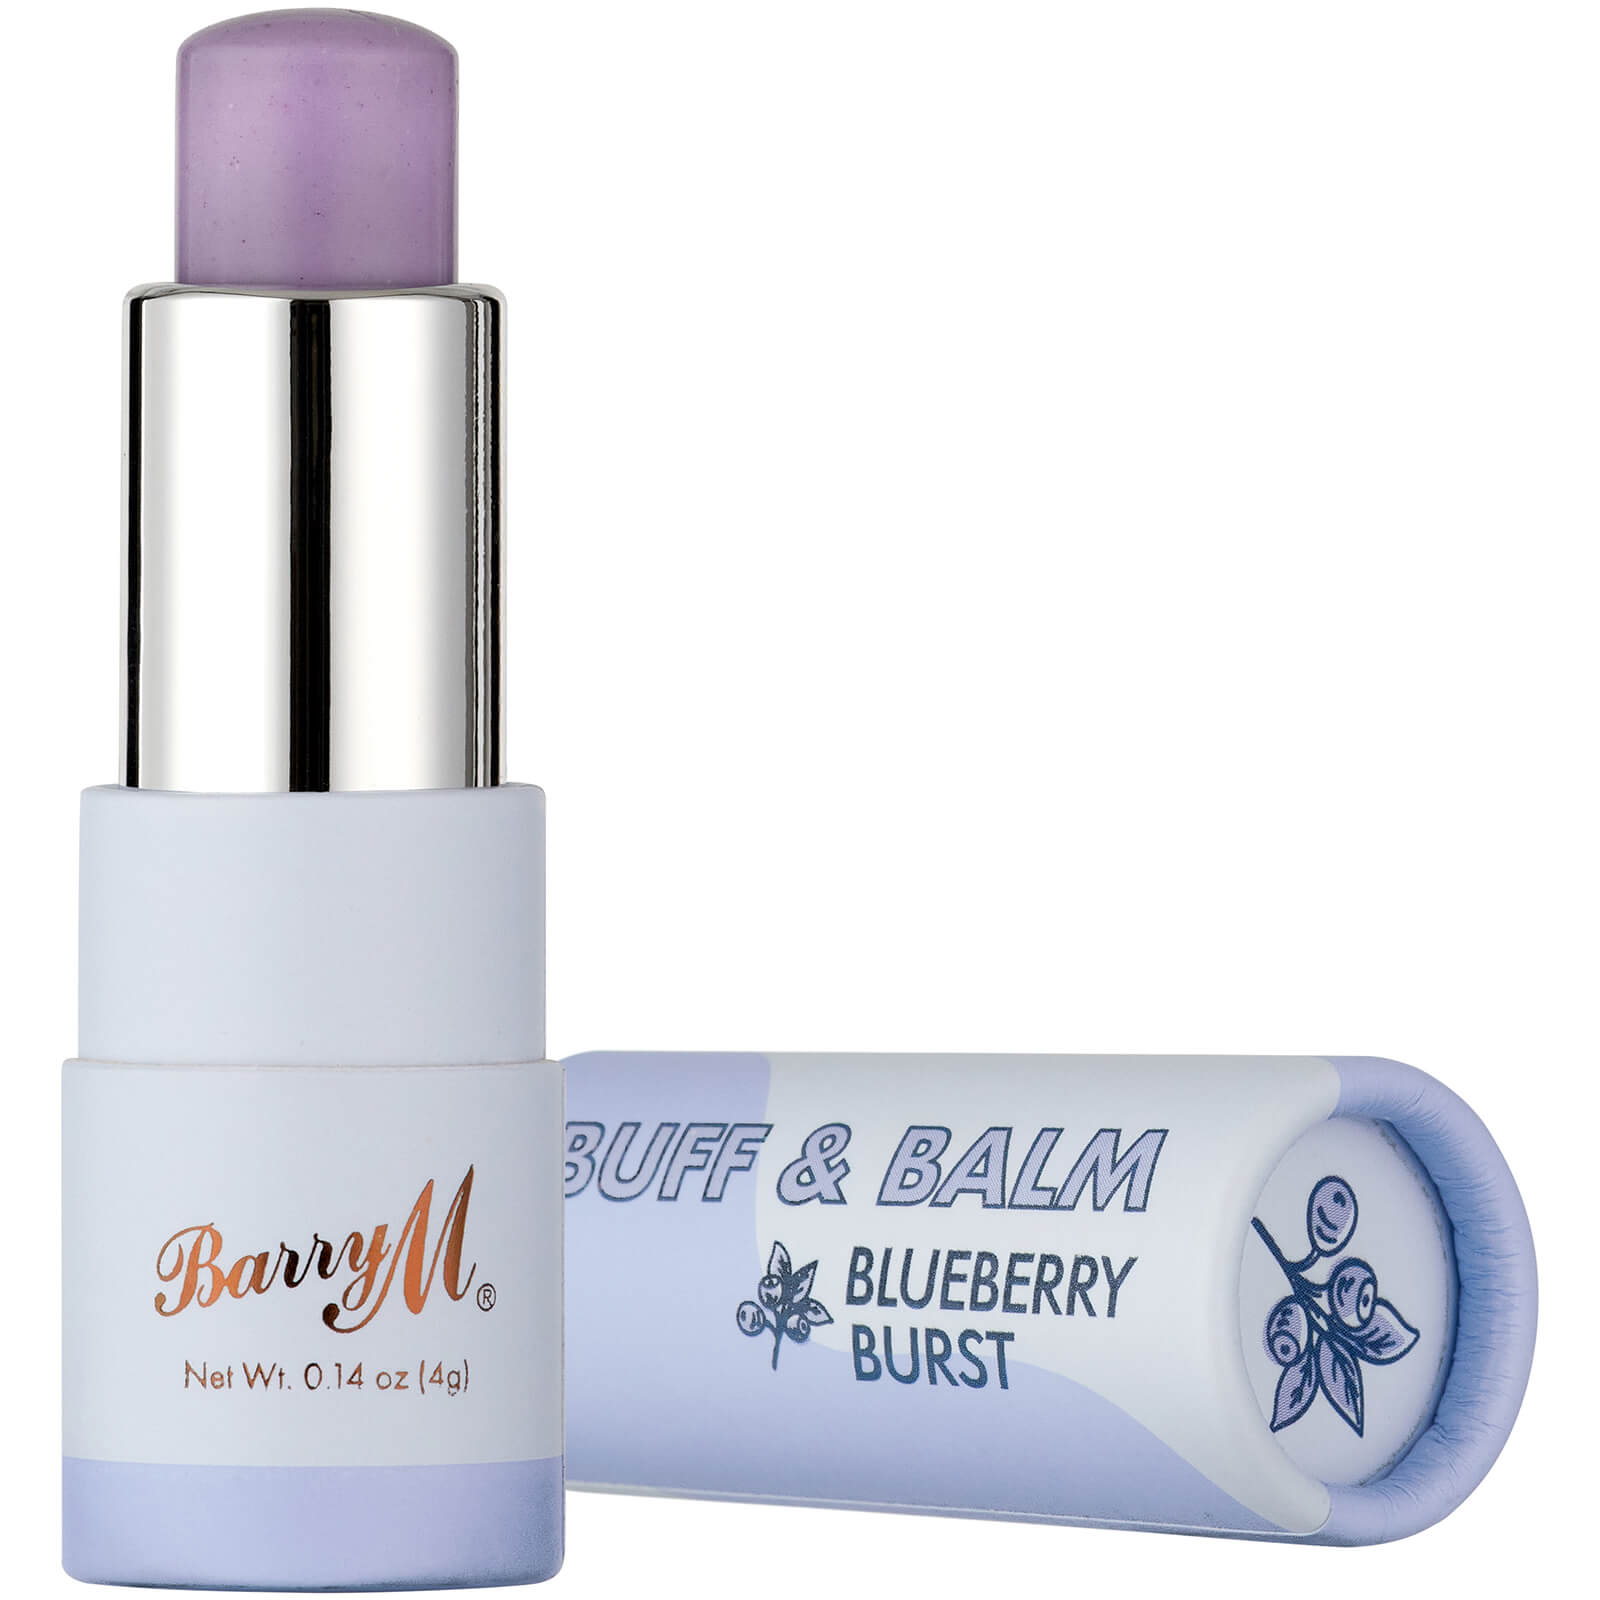 Barry M Cosmetics Buff and Balm 4g (Various Shades) - Blueberry Burst